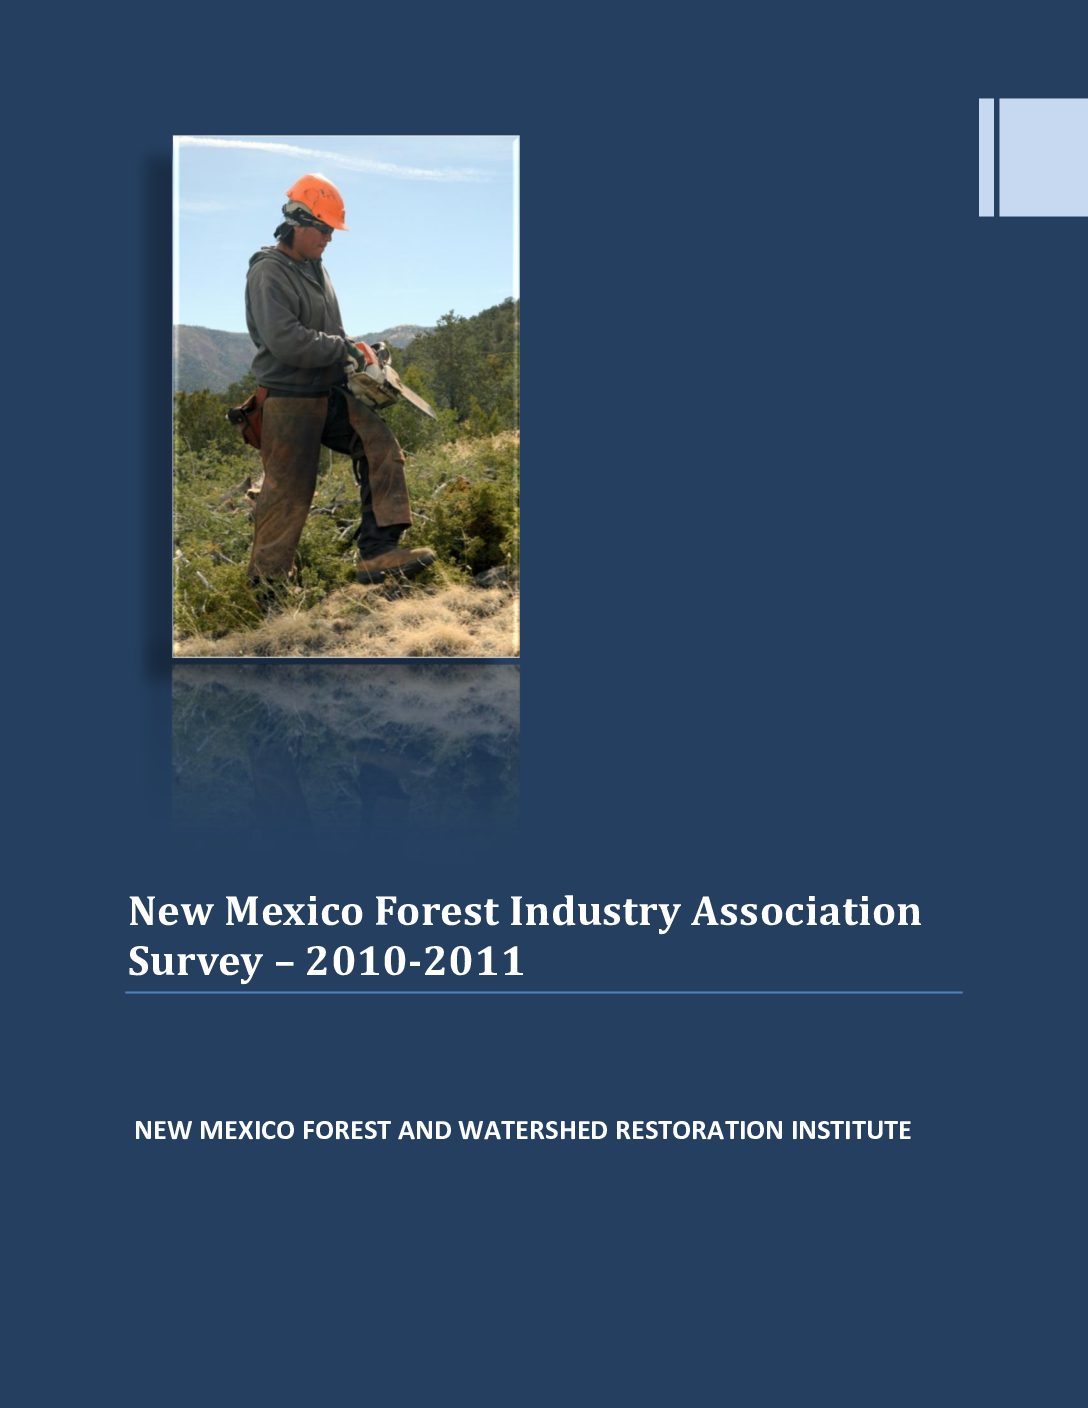 New Mexico Forest Industry Association Survey : 2010-2011